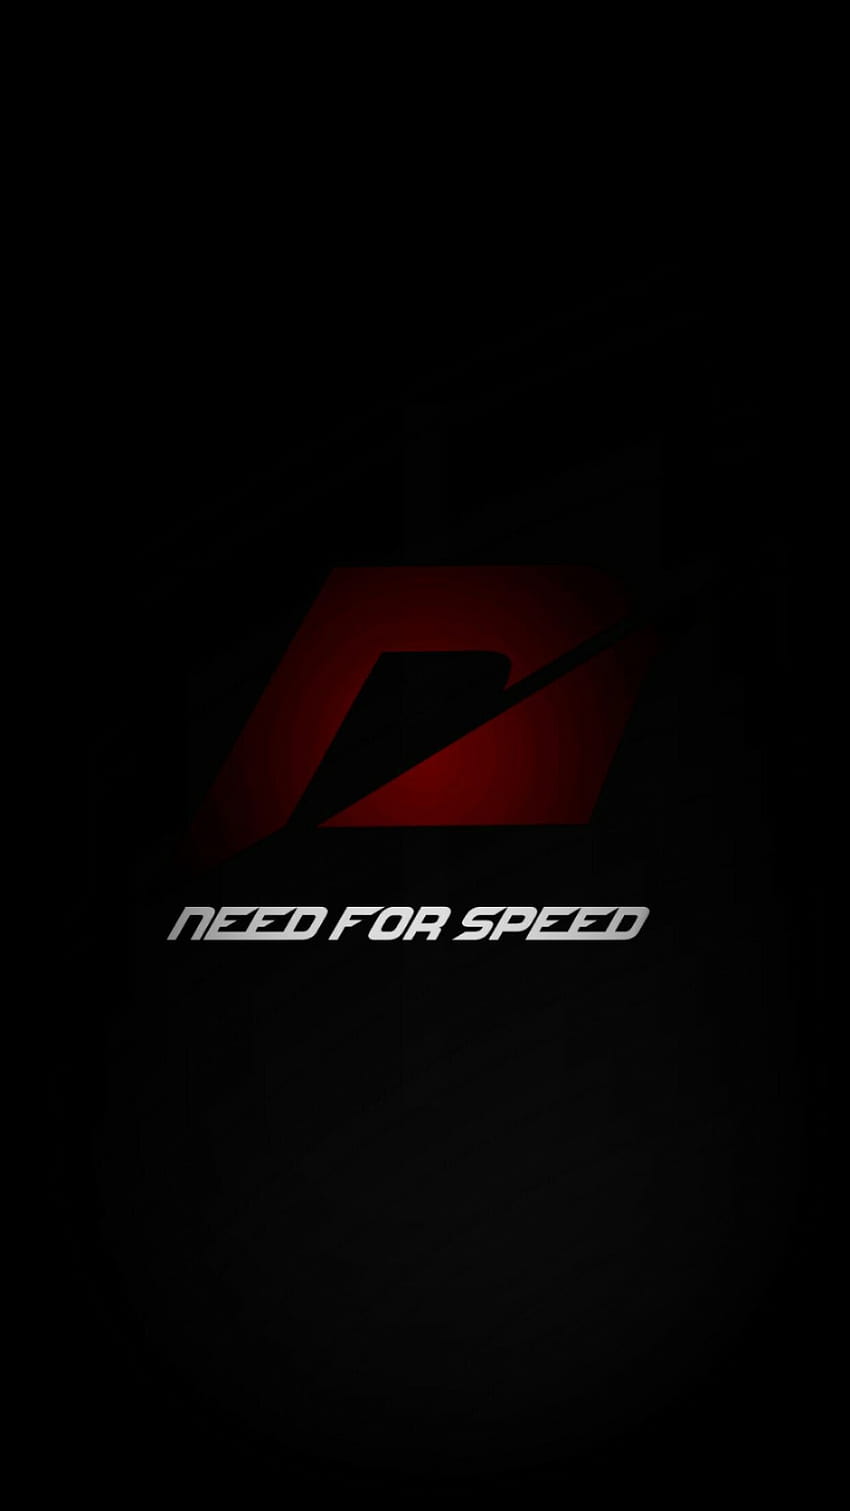 need for speed.logo.iphone, need for speed logo HD phone wallpaper